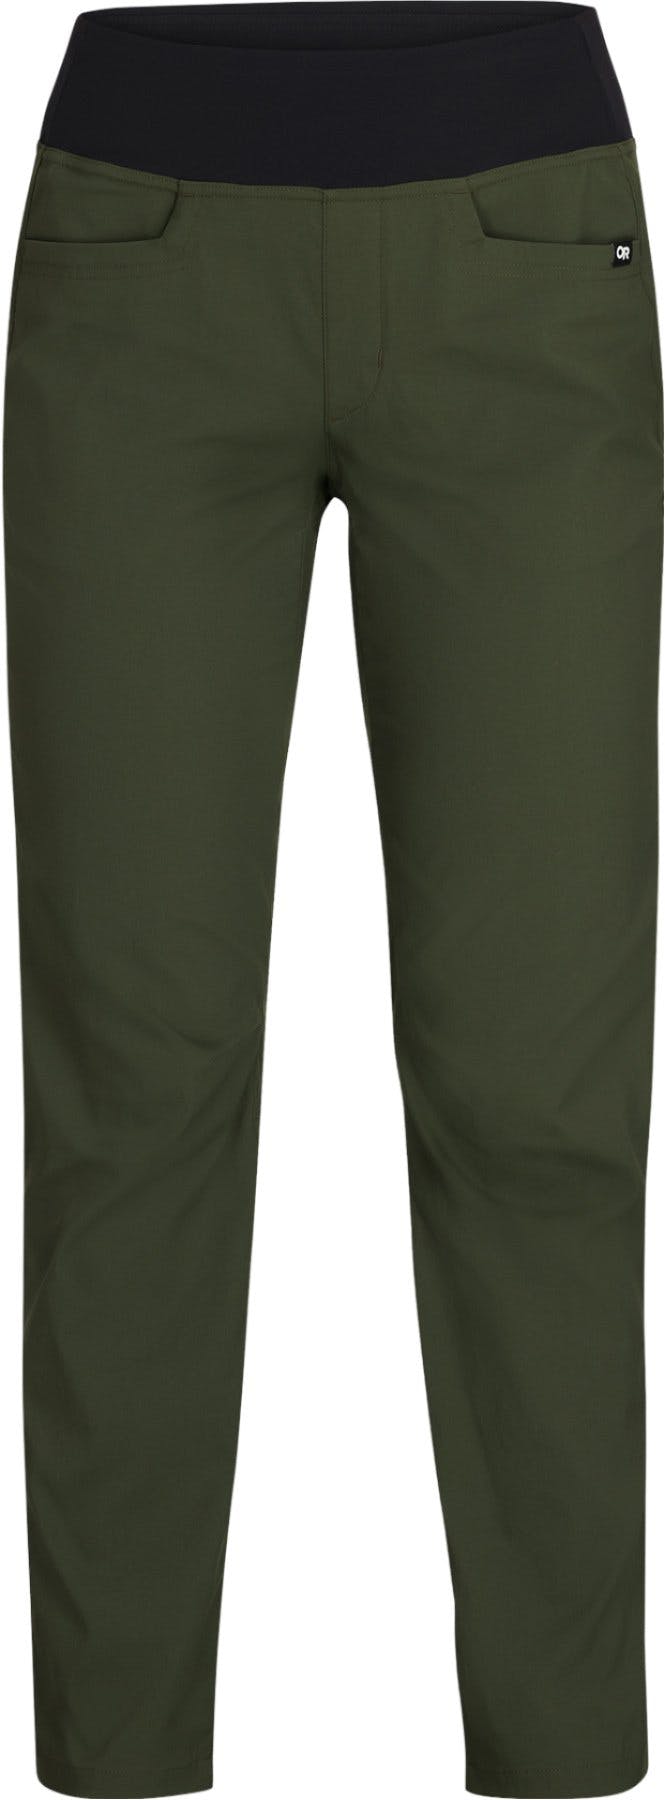 Product image for Zendo Pant - Women's